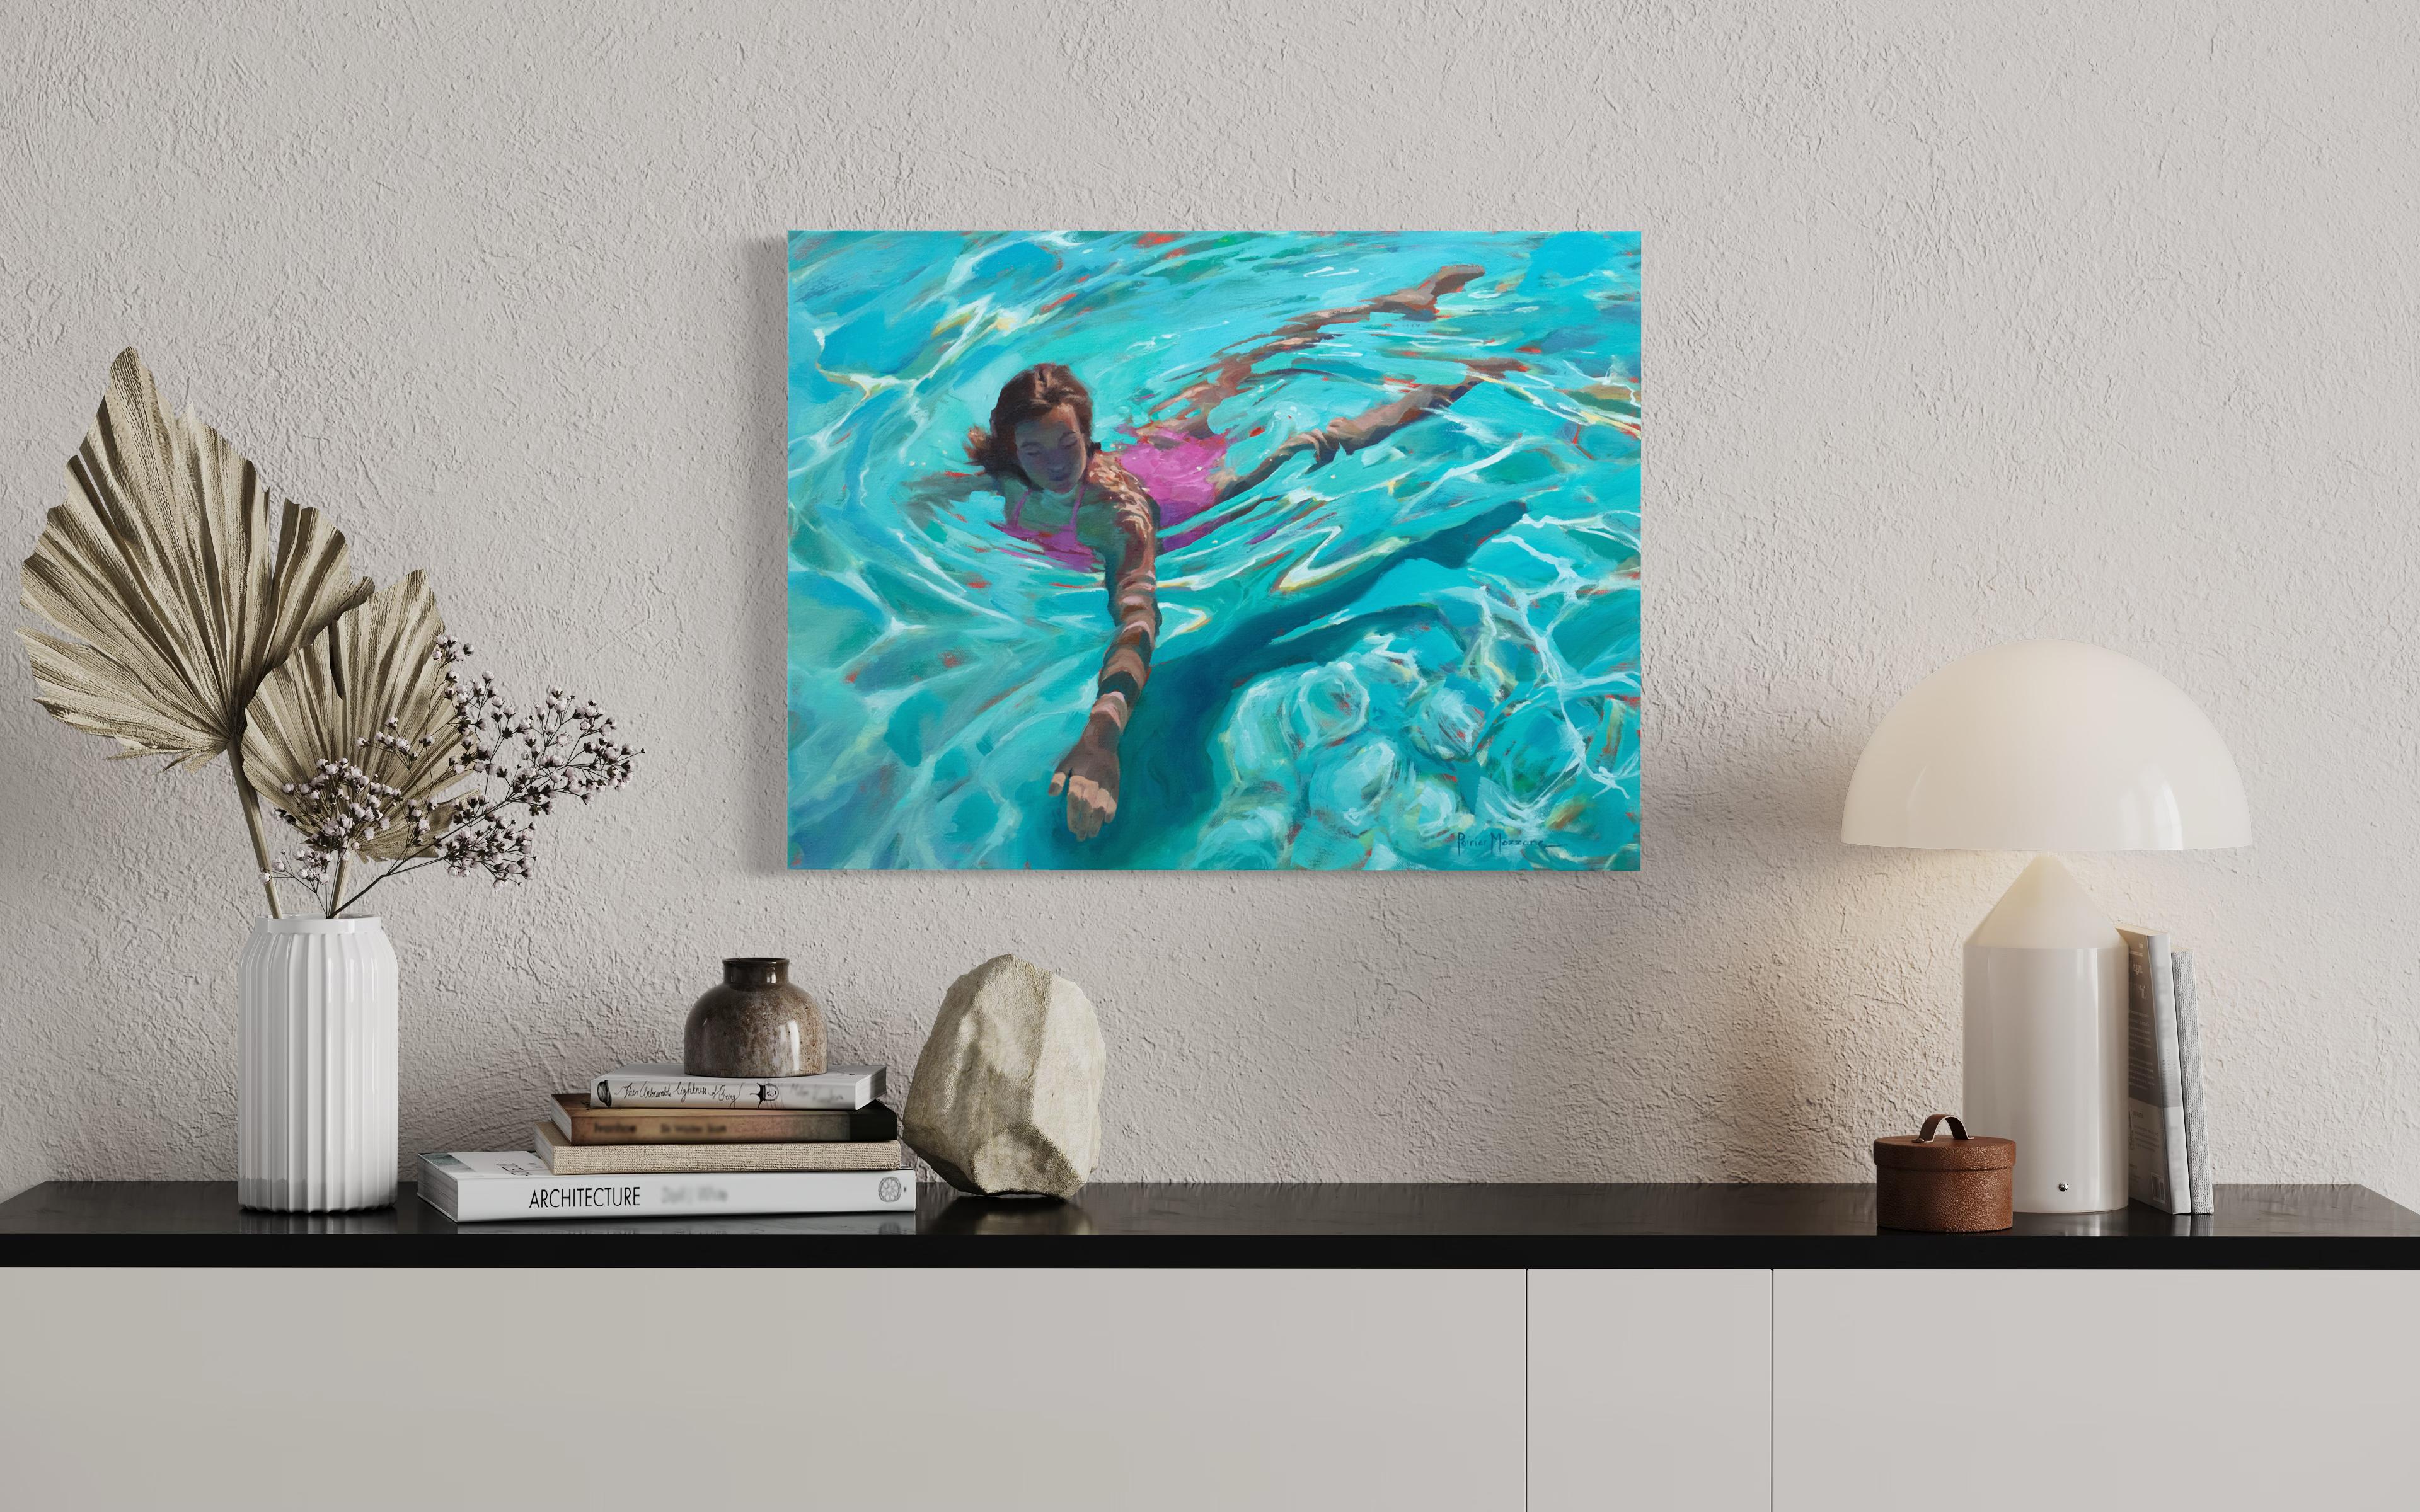 This figure painting by Michele Poirier-Mozzone is made with oil on canvas. It features a bright blue palette with warm accents. The artist captures a view of a girl in a pink bathing suit from a viewpoint above the water in which she swims, with